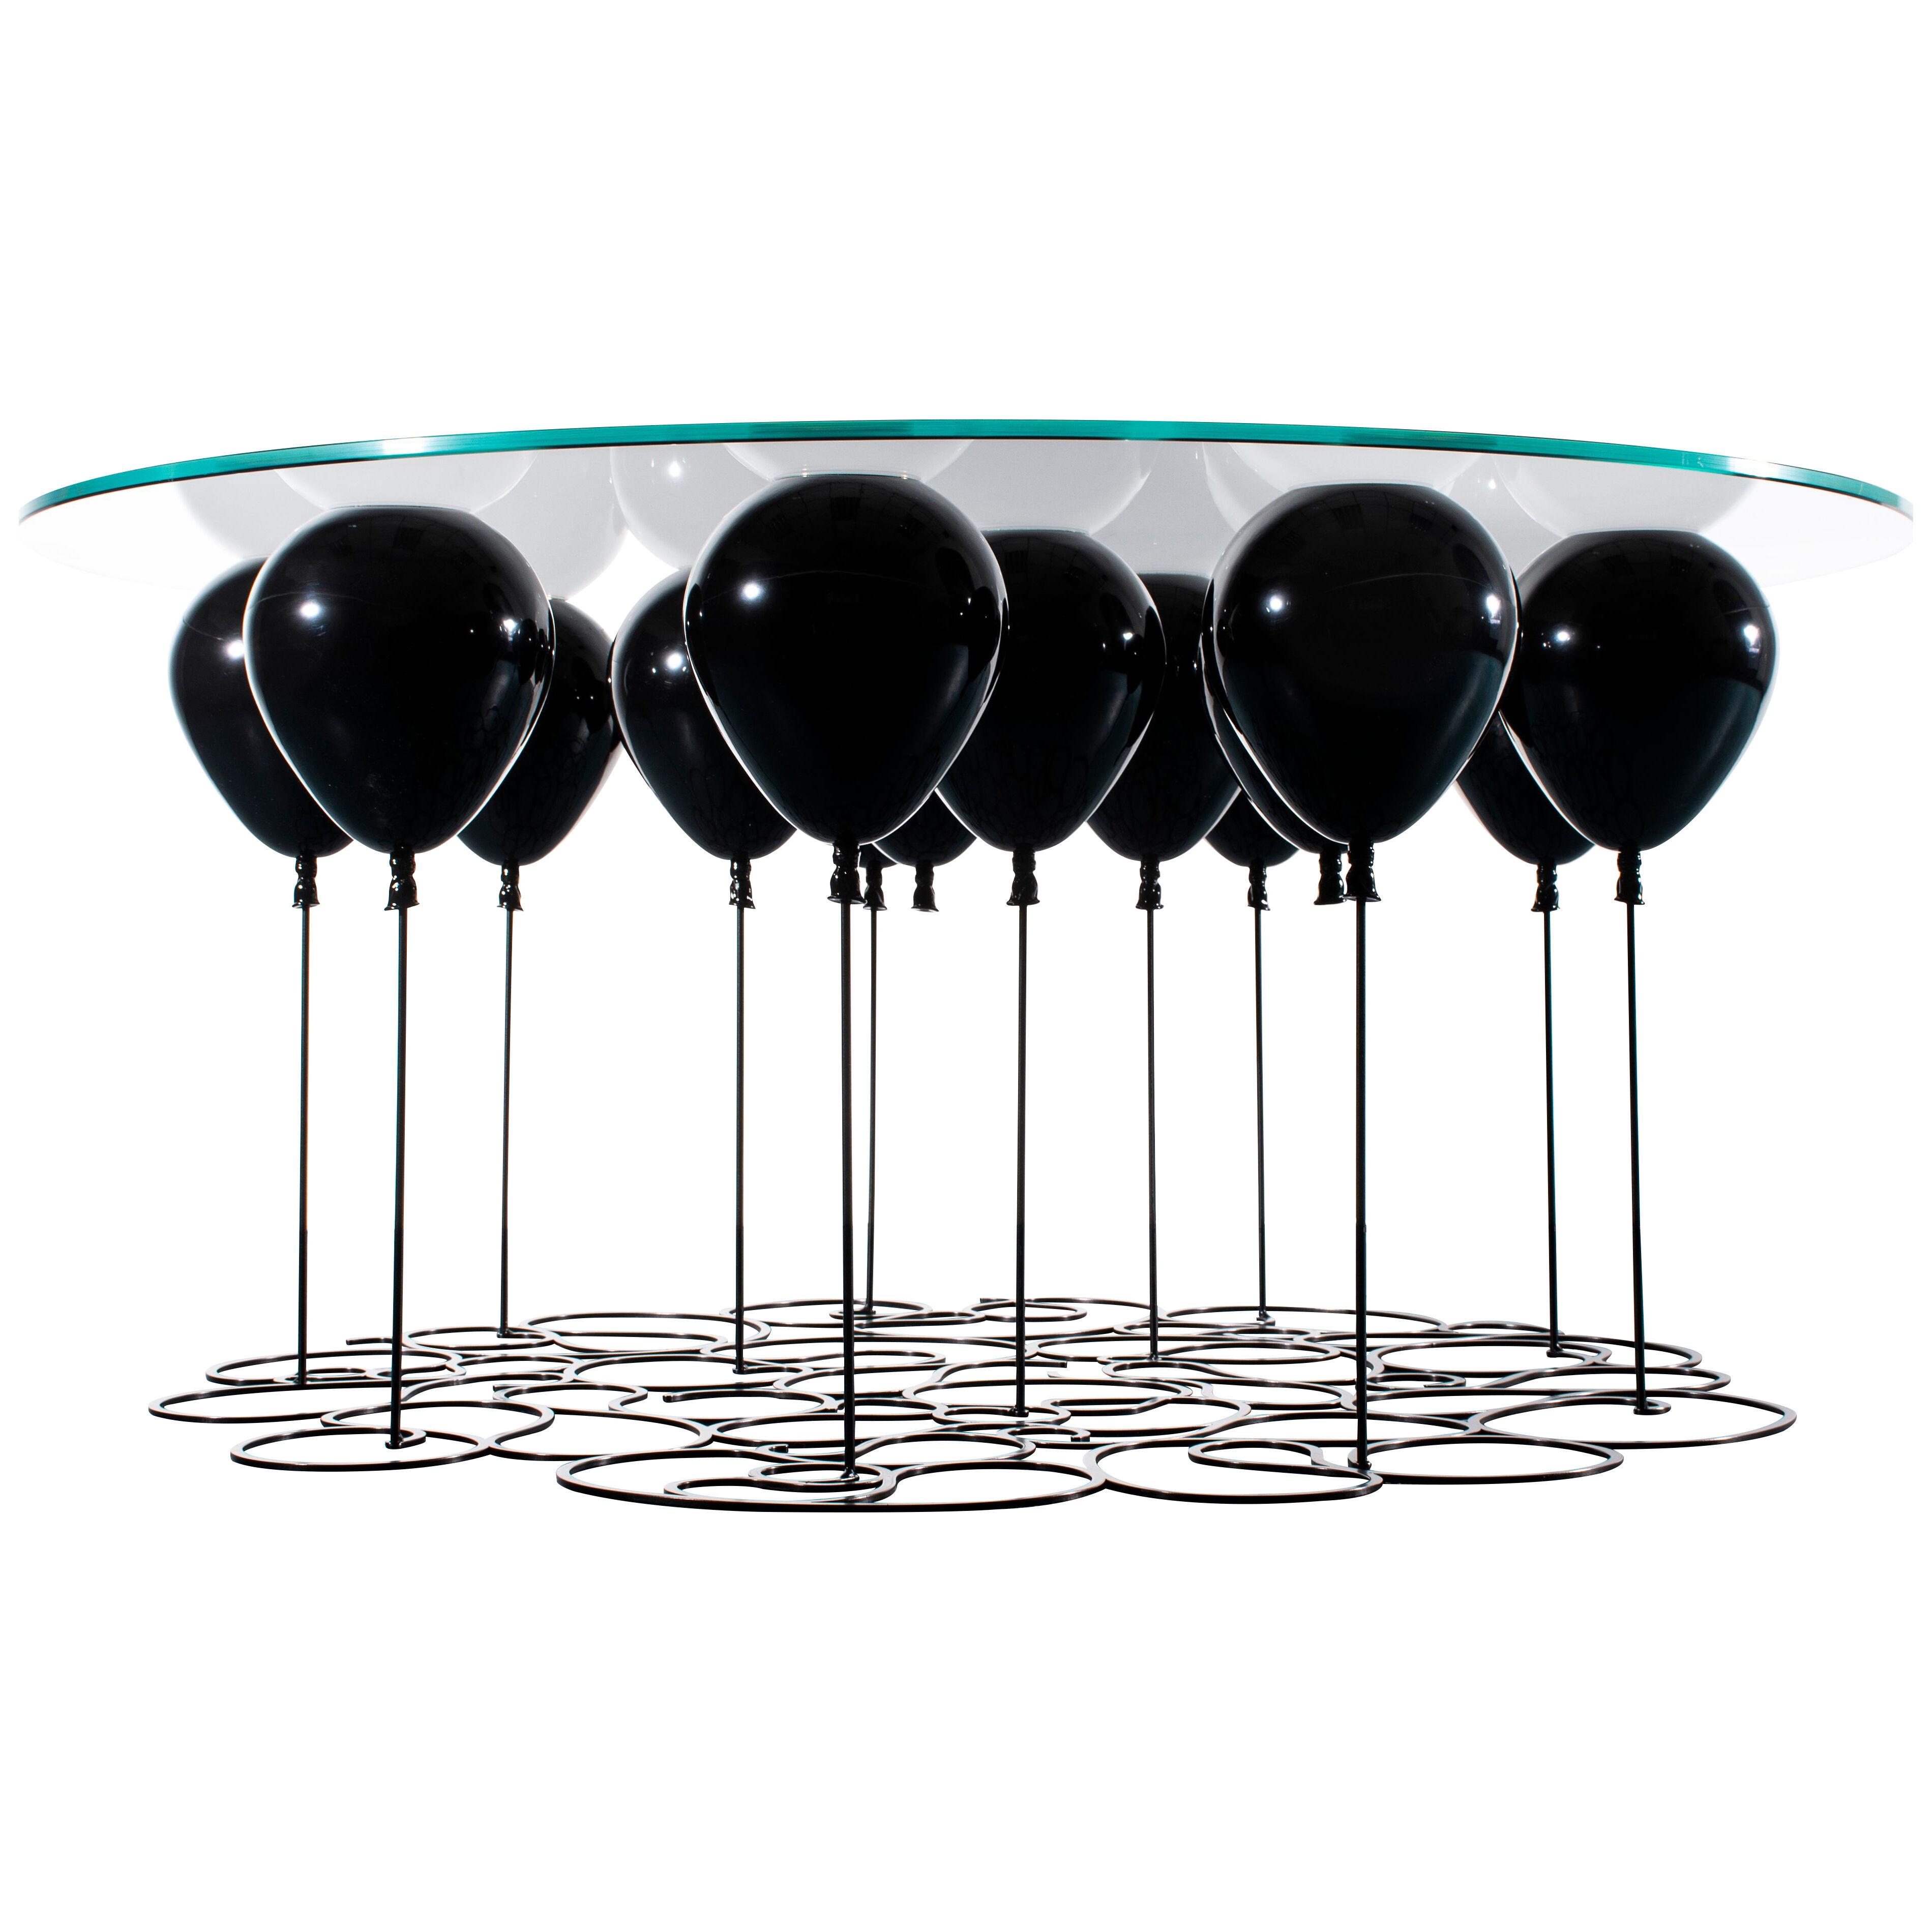 Up! Balloon Coffee Table, Black Edition